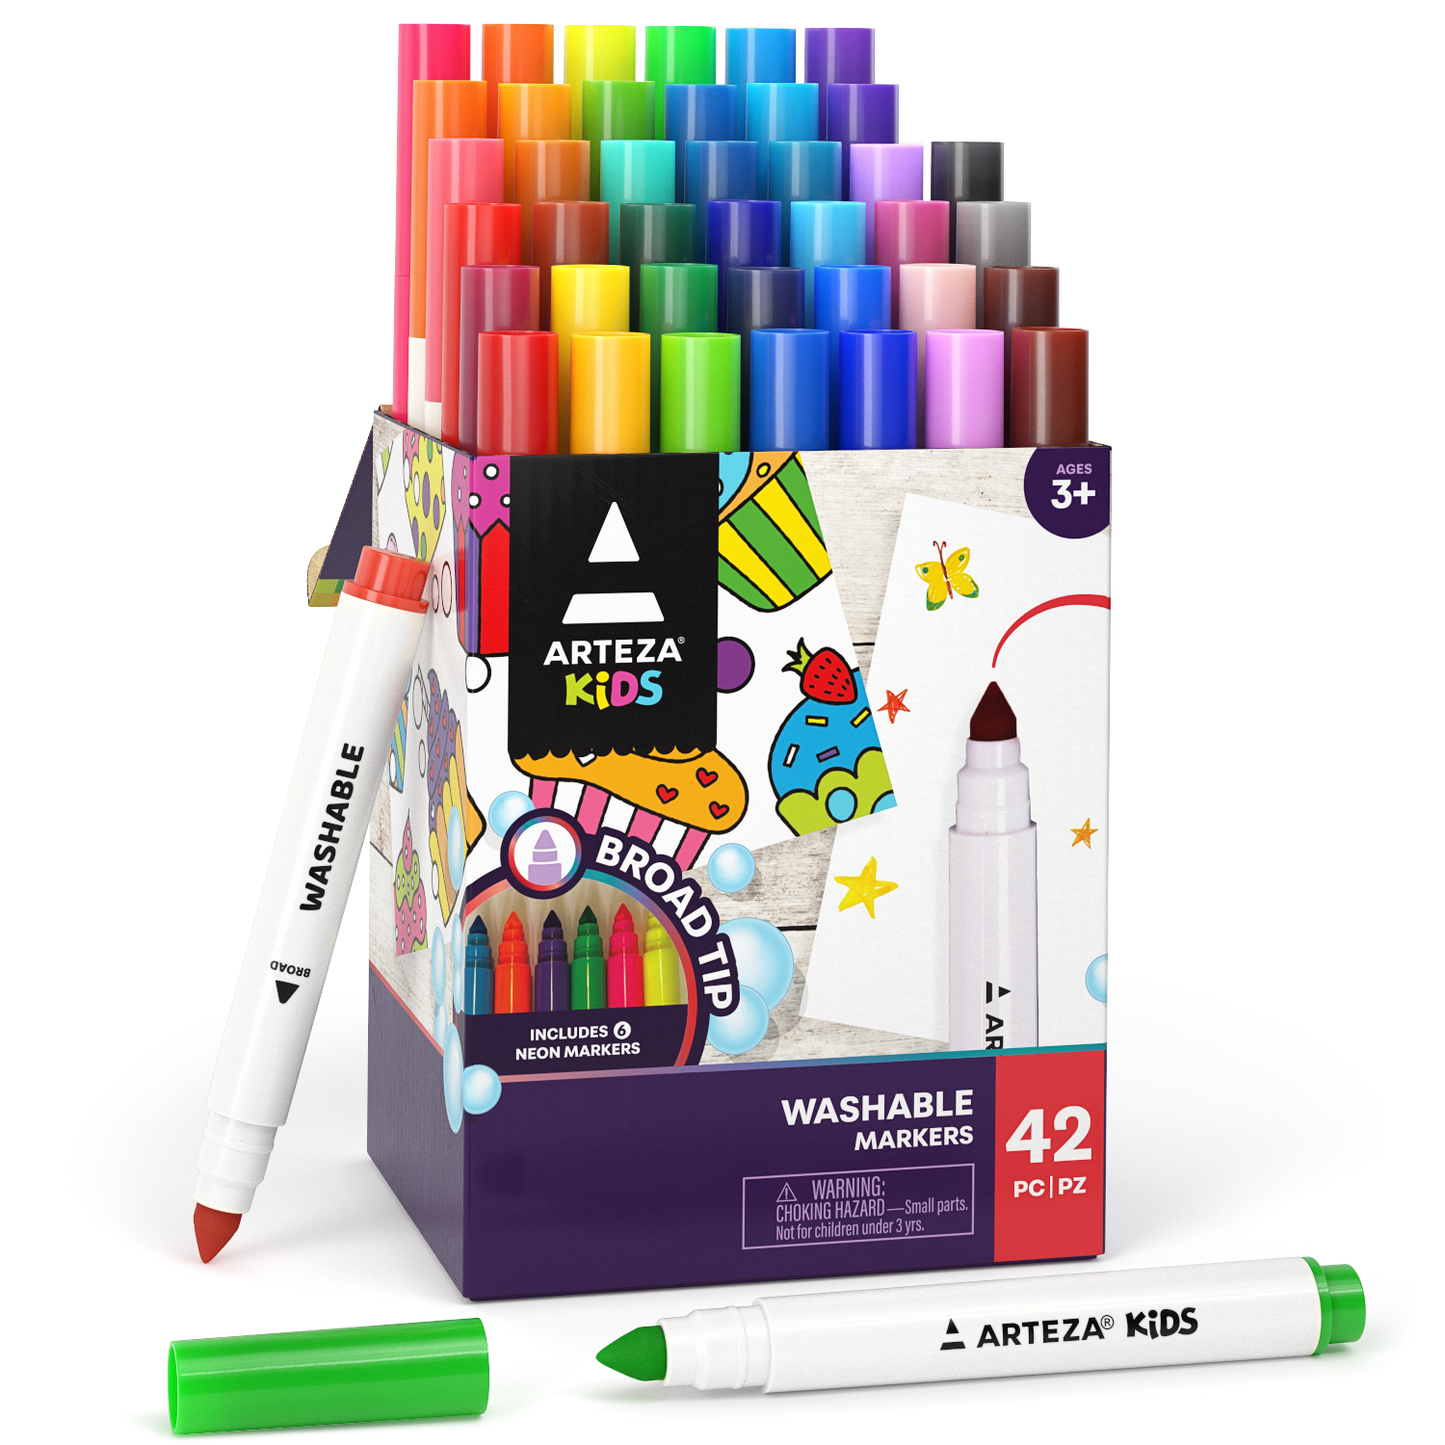 KIDDYCOLOR 36 Colors Washable Marker Set for Kids, Conical Tip Broad Line  Markers for Kids, Art Marker Set for Toddlers Age 3+, Perfect for Halloween